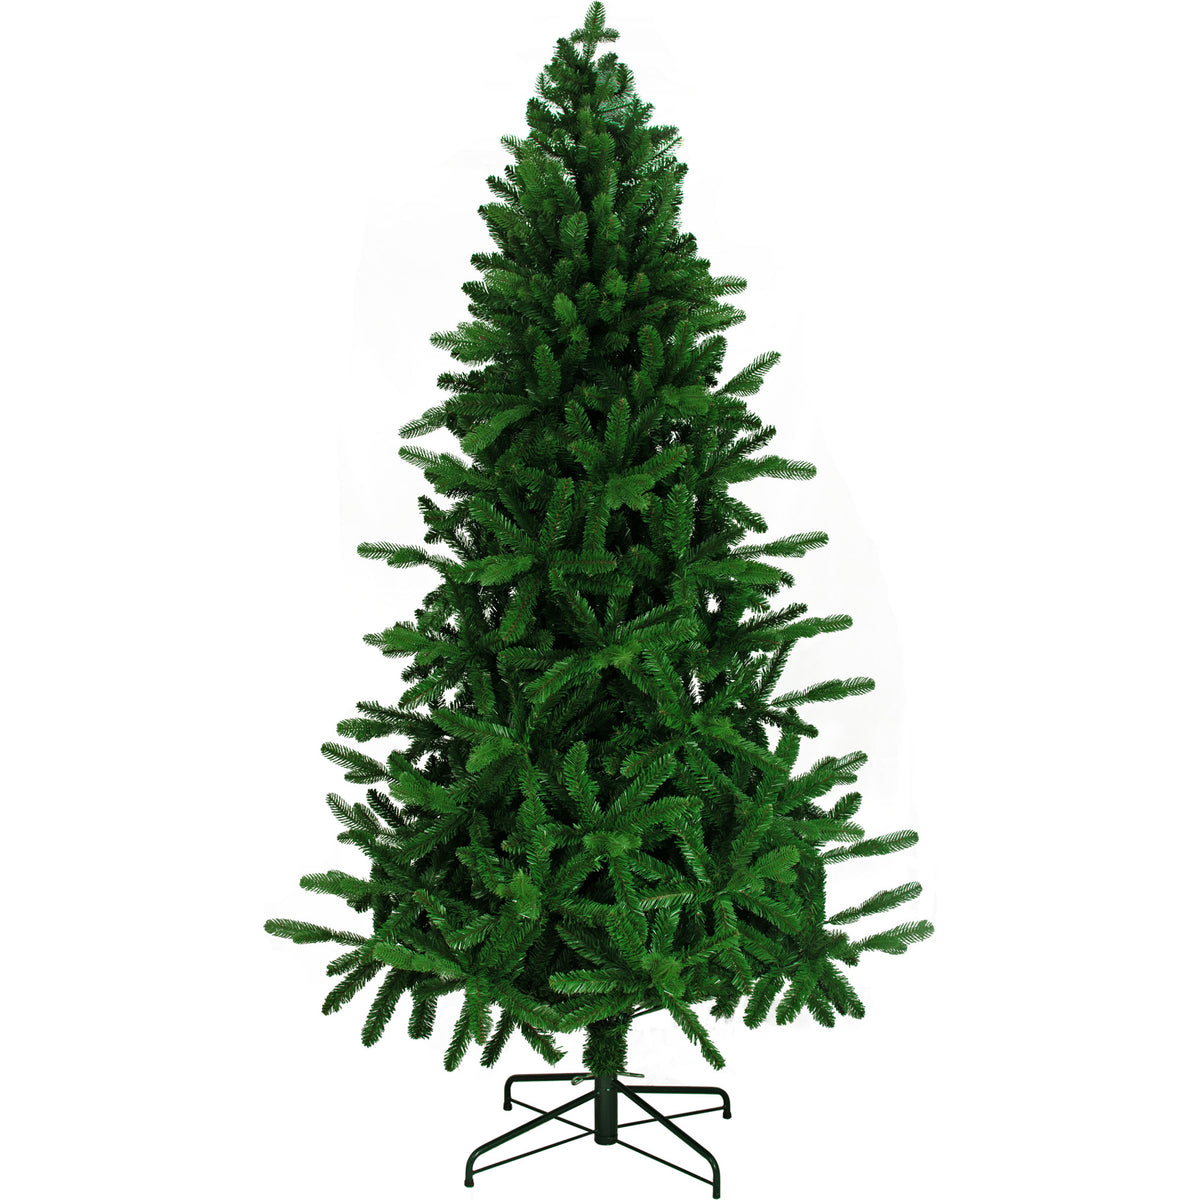 Introducing the 7 Foot Tall Artificial Fraser Tree from our Luxe Christmas Collection!